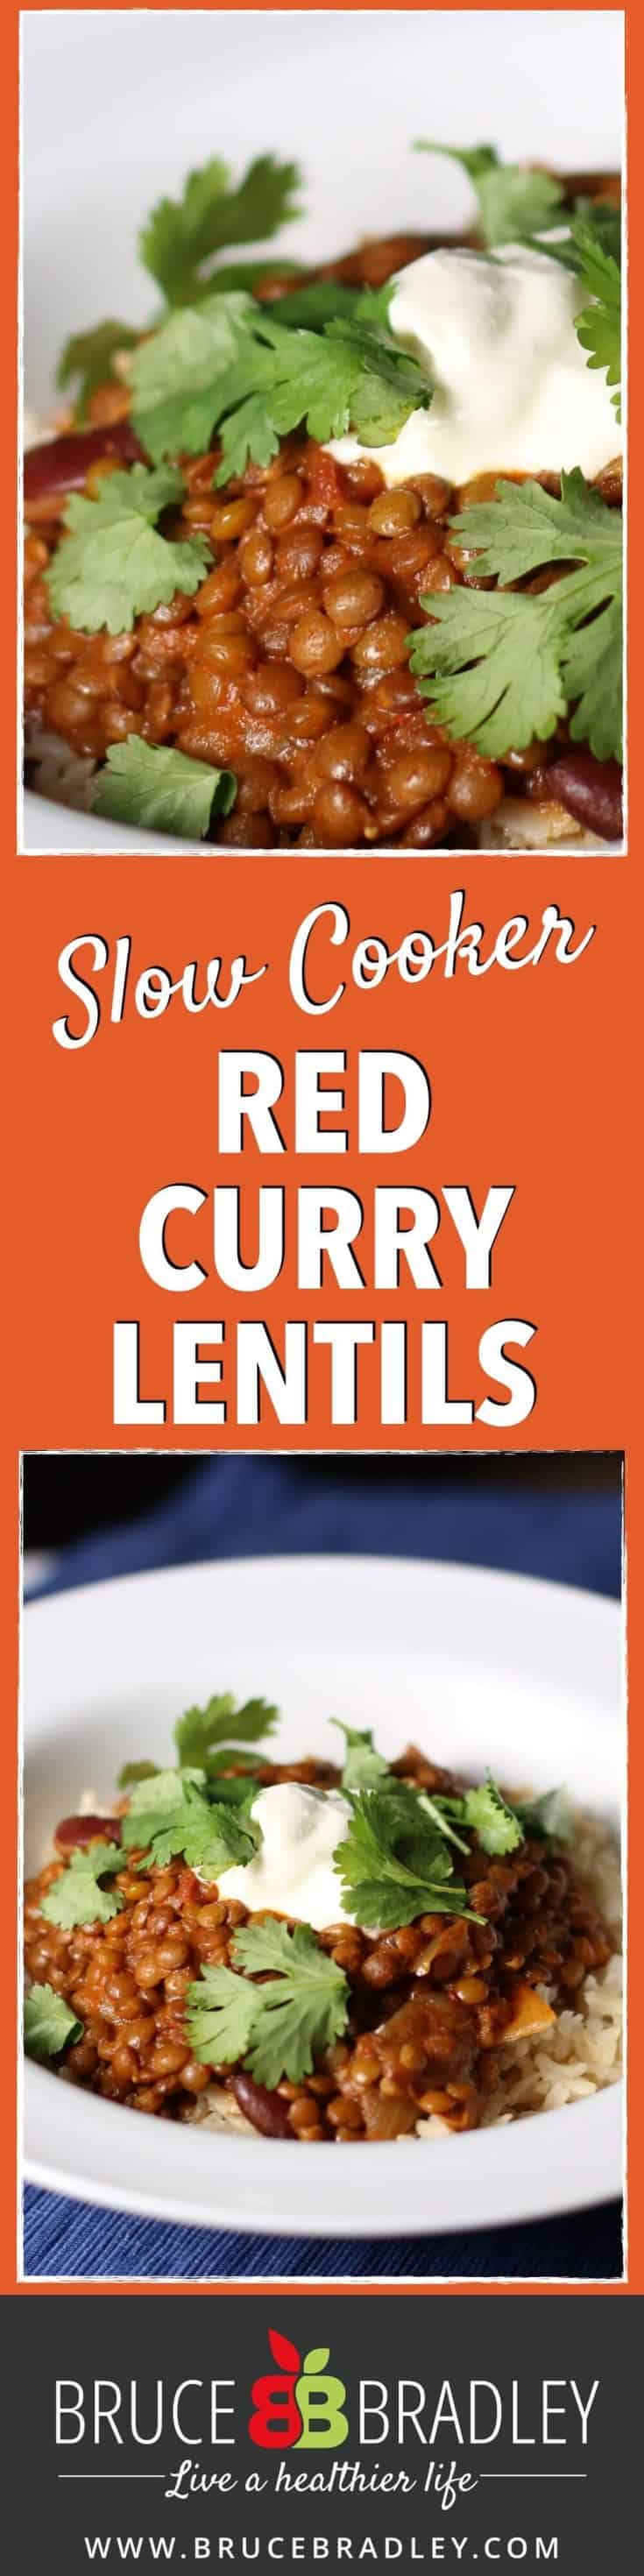 Although My Red Curry Lentils Are Inspired By Flavors From Asia, Don'T Let Its International Flair Scare You Away. In Fact, It'S A Super Easy Slow Cooker Recipe That'S The Perfect Marriage Of Flavor, Nutrition, And Convenience!